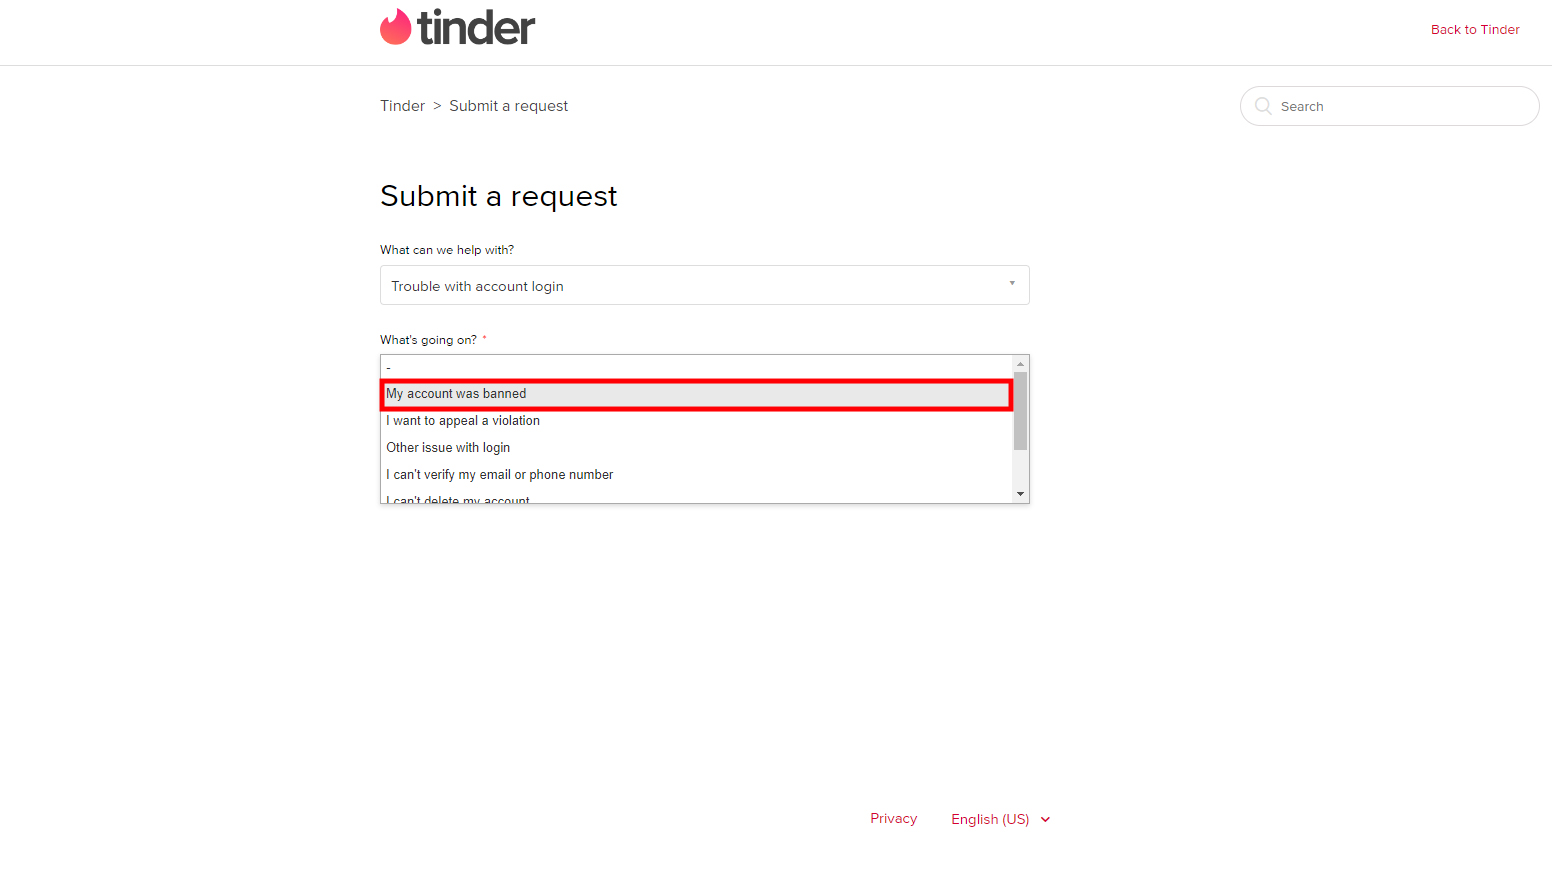 How to make an appeal when your Tinder account is banned (2)